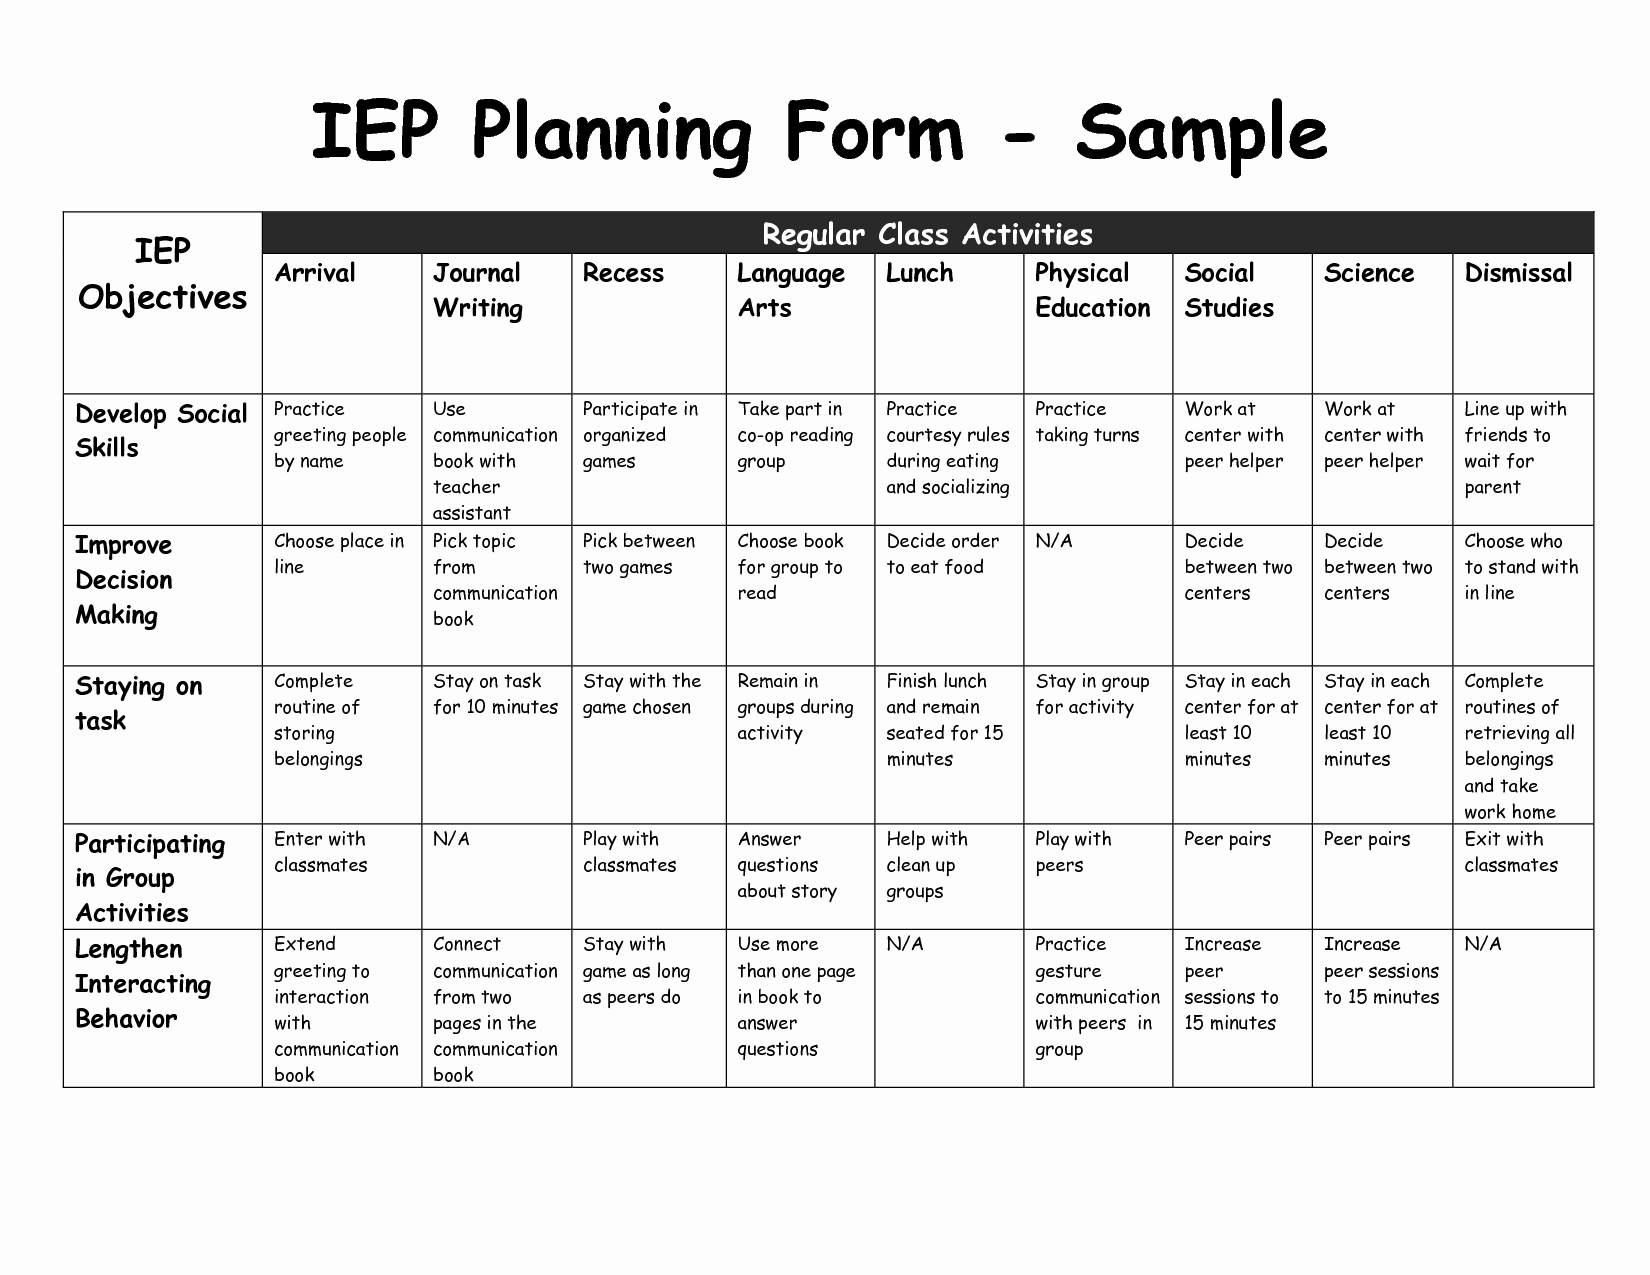 Individual Learning Plan Template Unique Iep Iep Planning form Sample